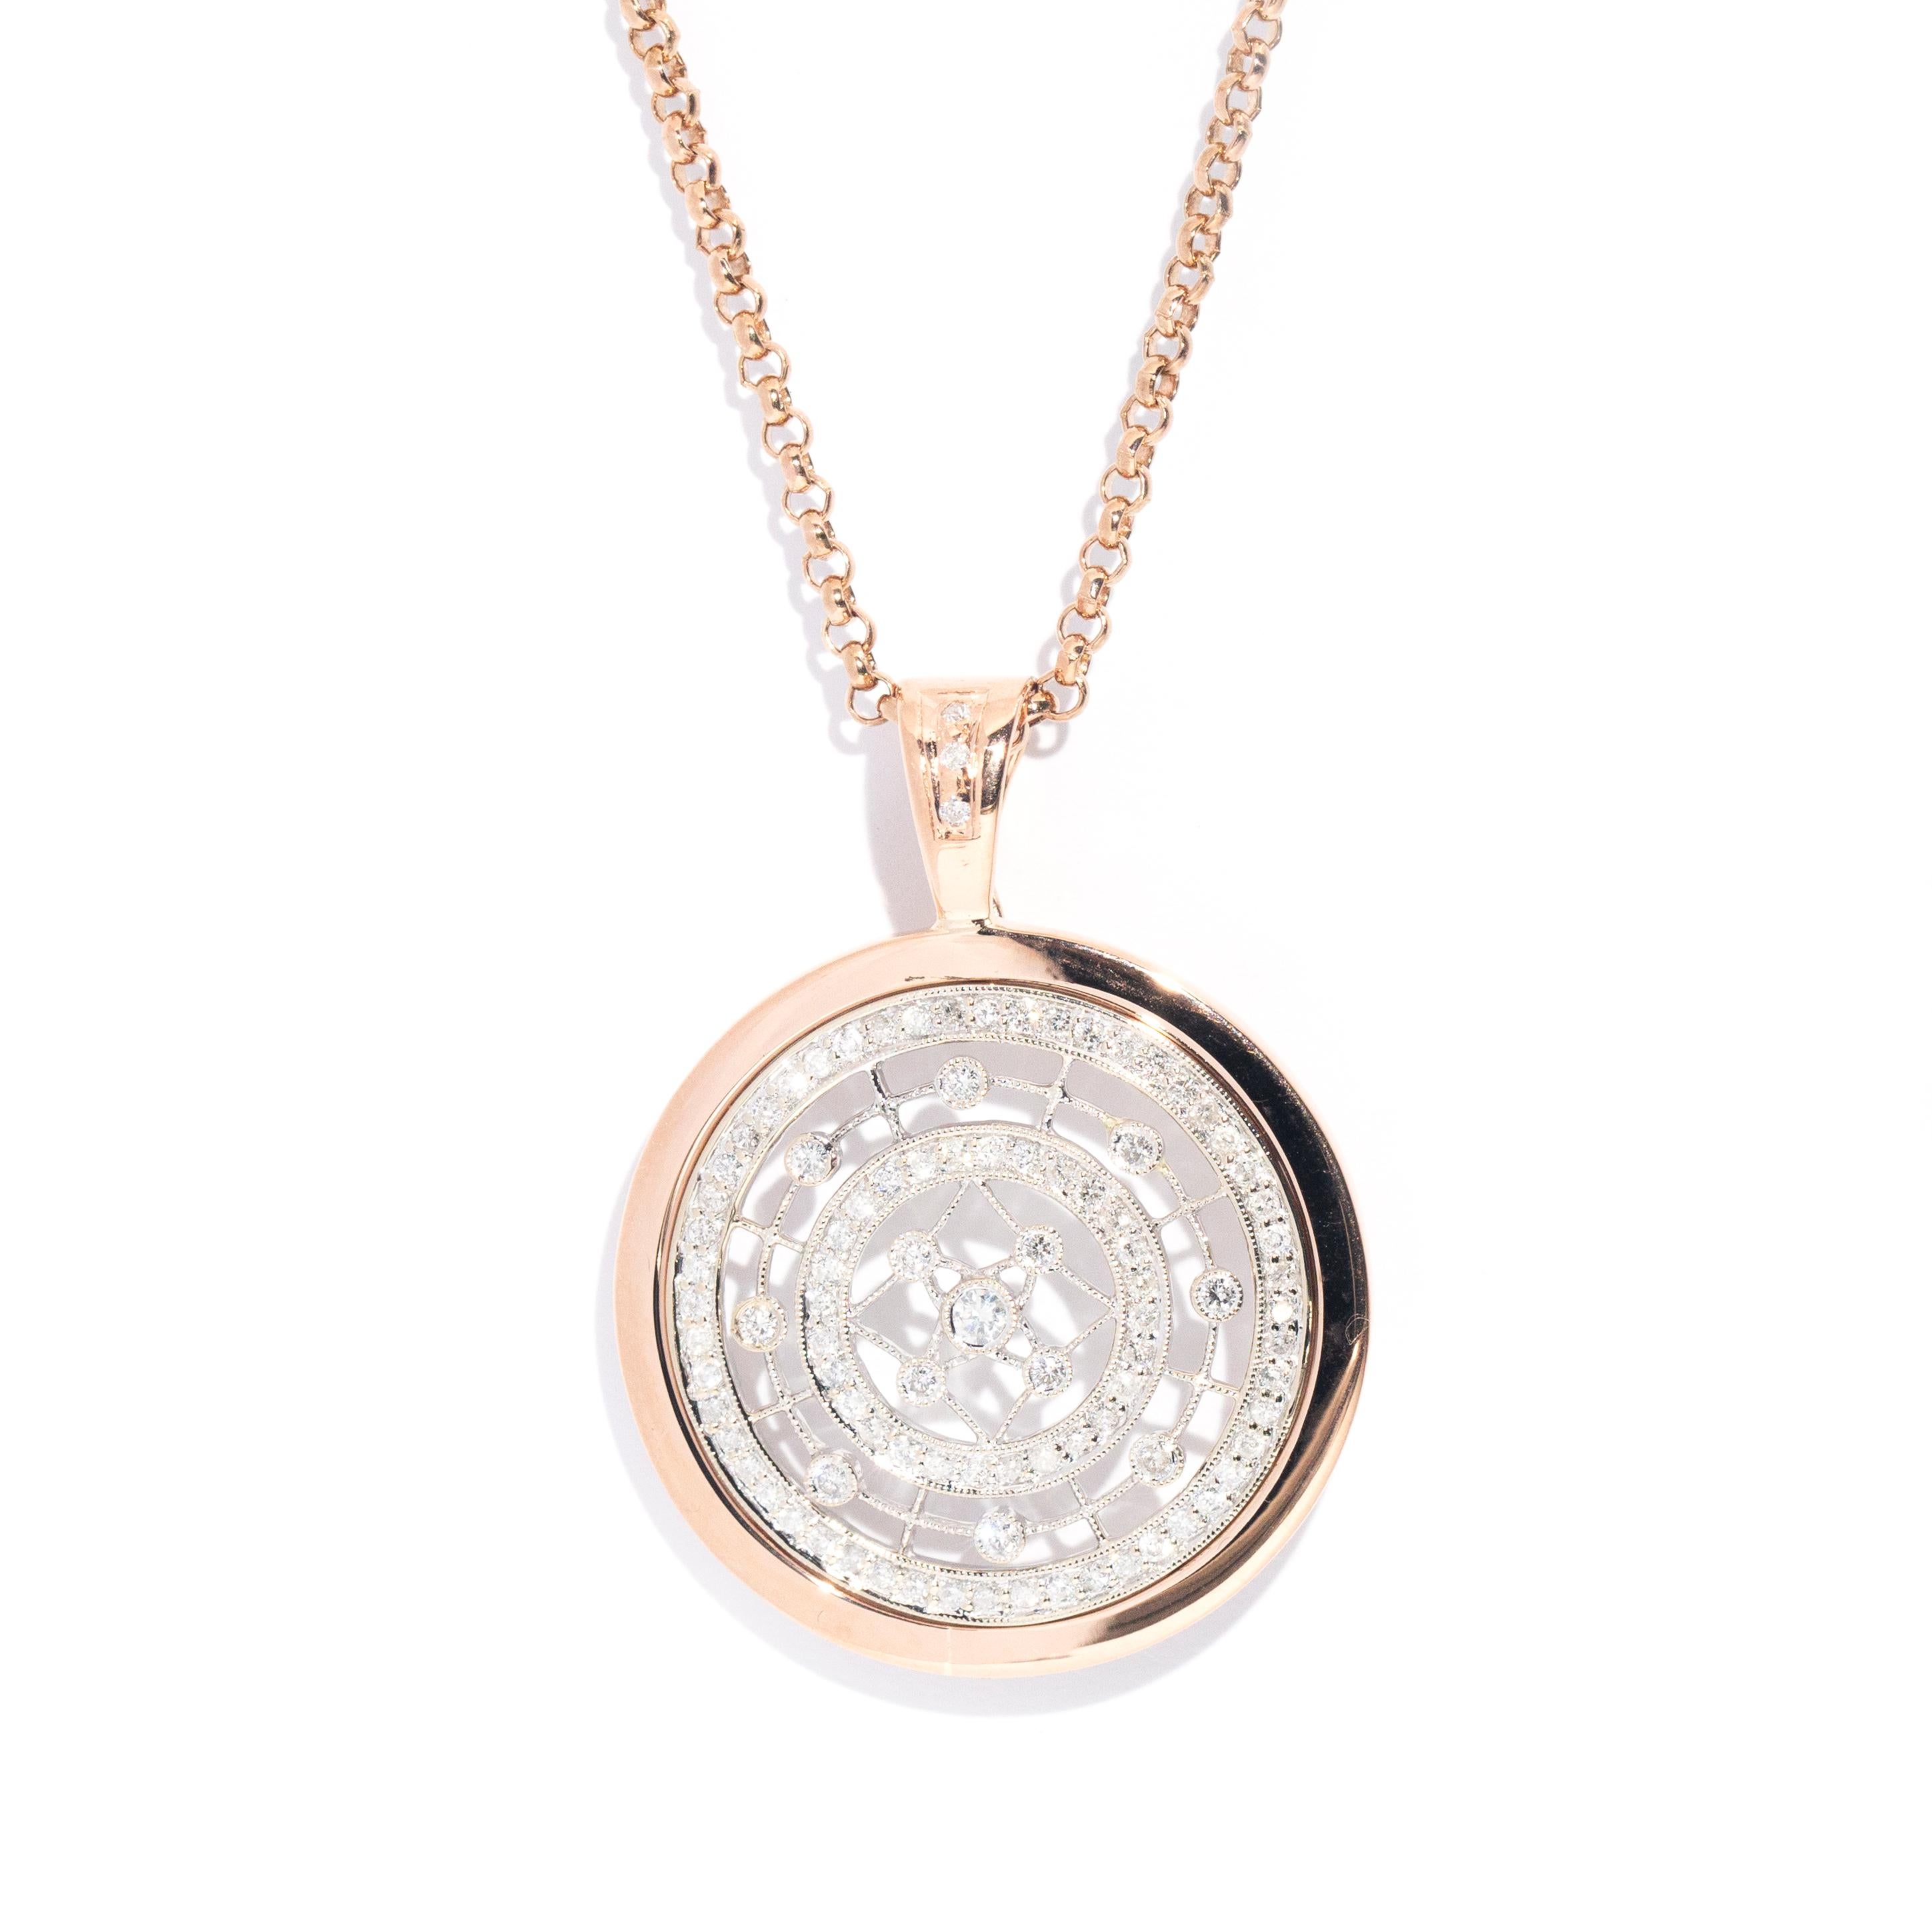 Circa 1980s 9 Carat Rose and White Gold Diamond Disc Enhancer Pendant and Chain 1